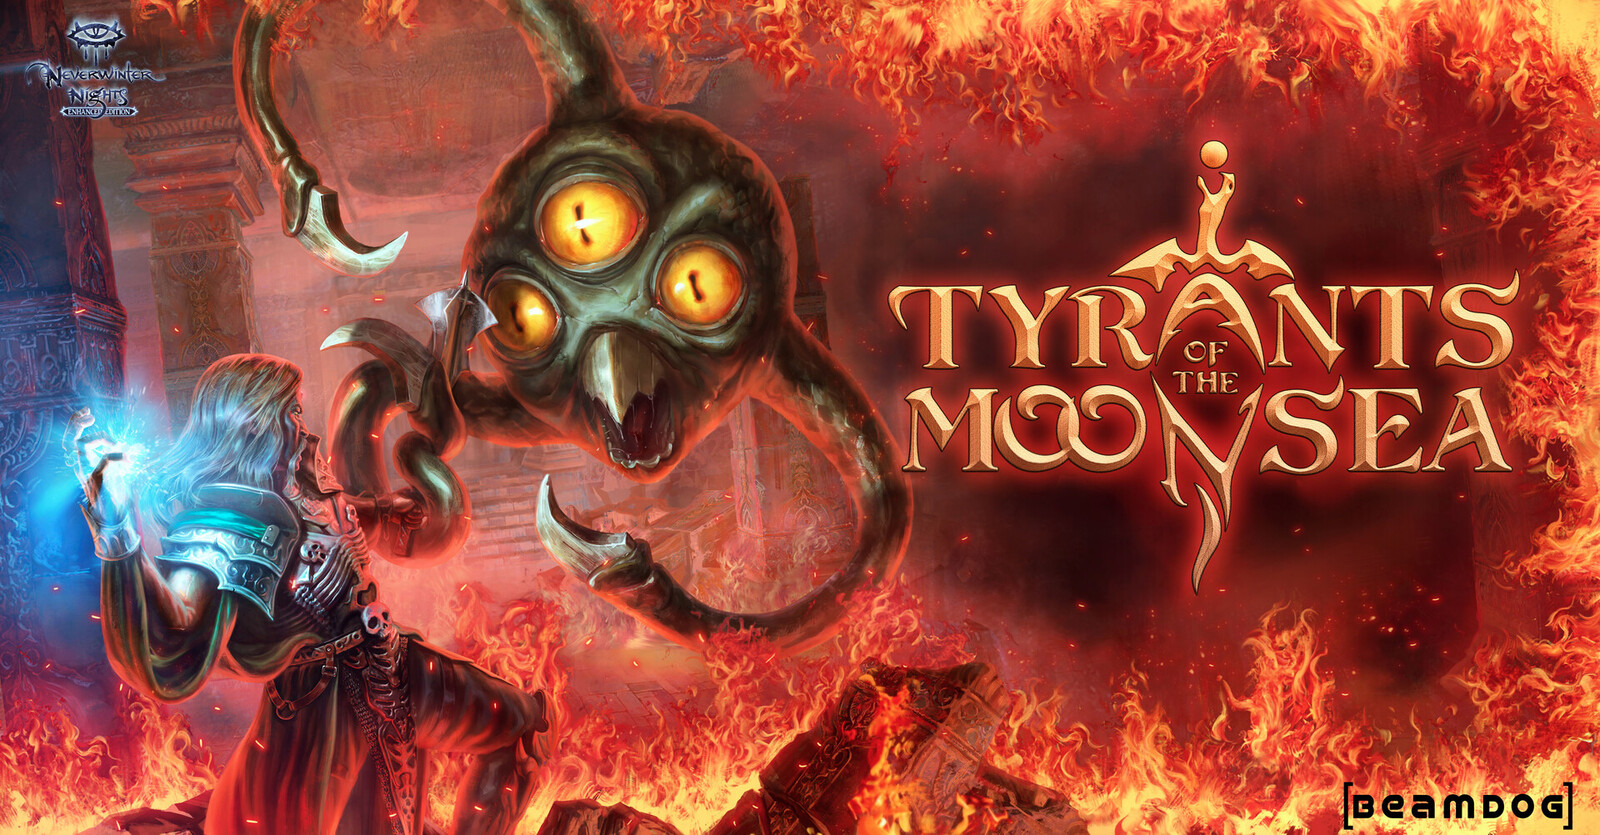 Tyrants of The Moonsea
I did this illustration for the game Neverwinter Nights, new edition. Tyrants of the Moonsea.
Along with good professionals, Ossian Studio and Beamdog. Hope you like it.